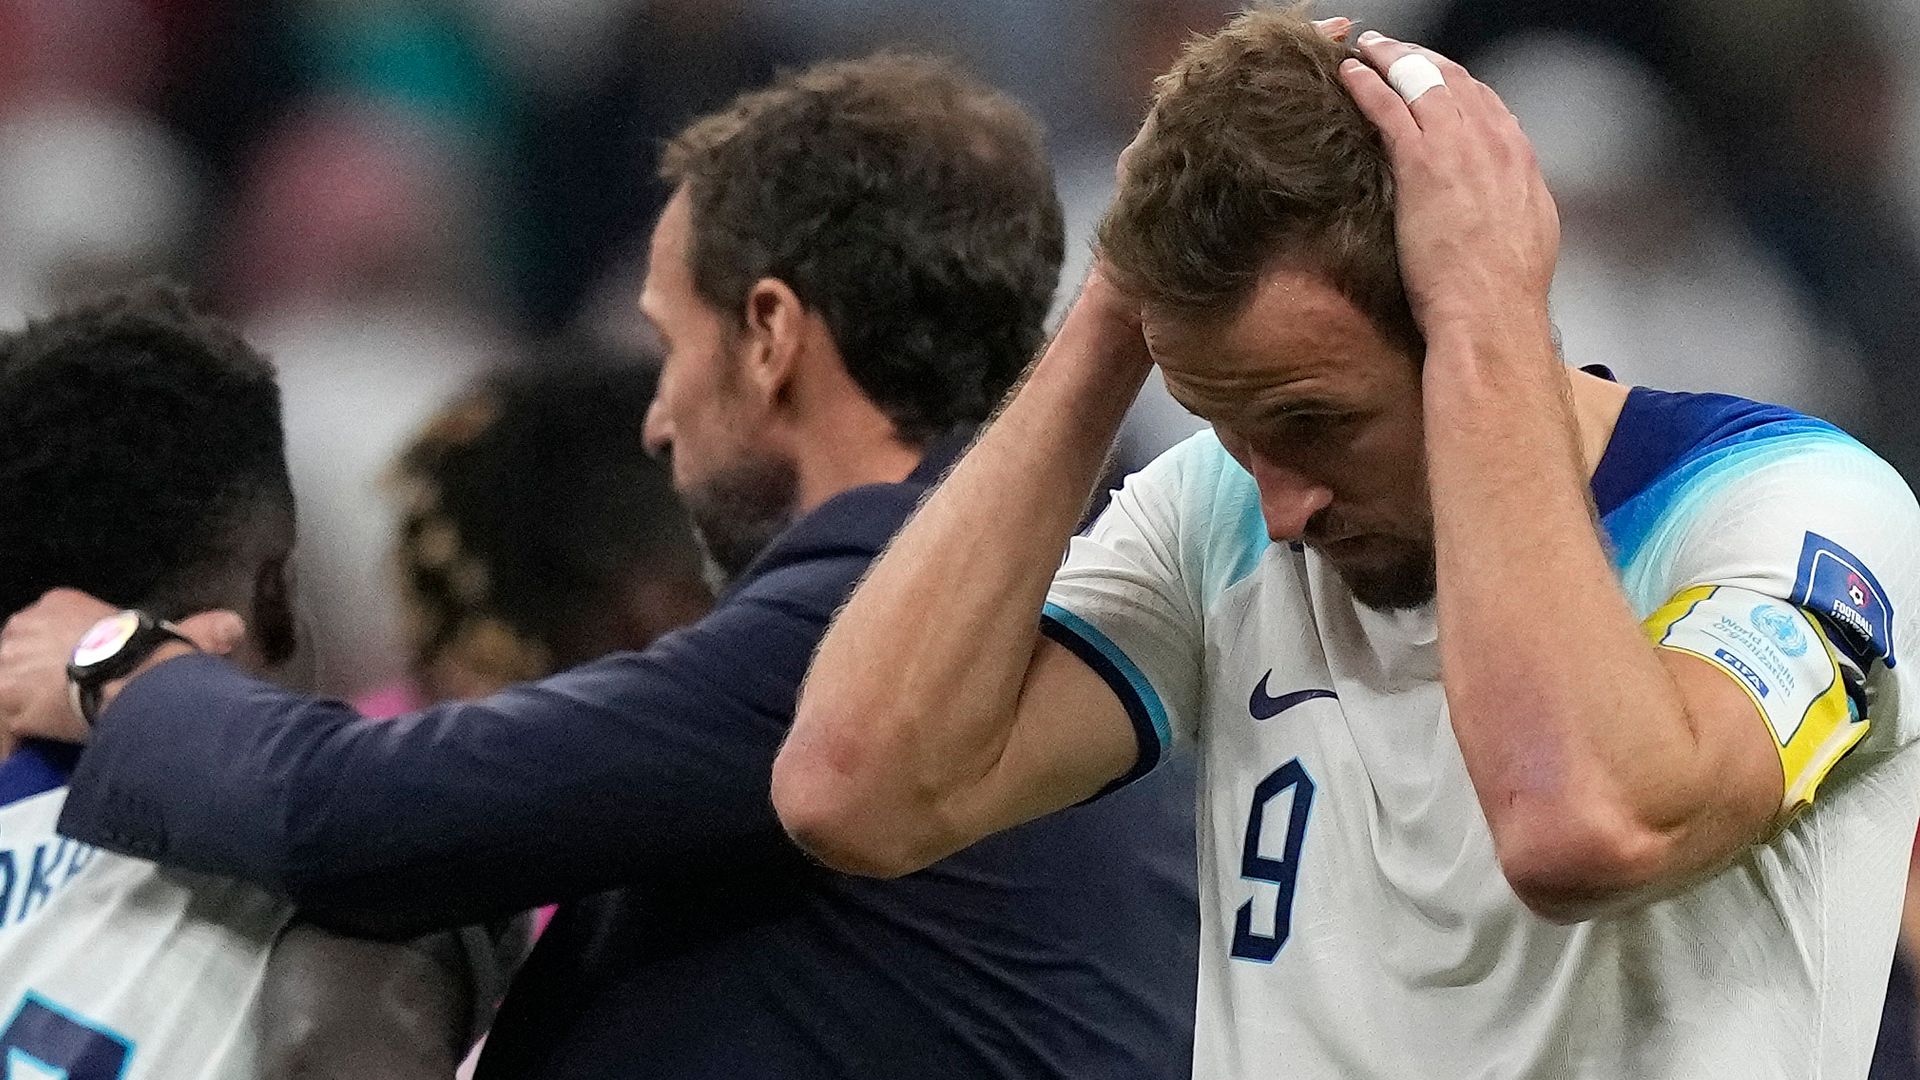 England vs France saw highest abuse spike during World Cup - FIFA report